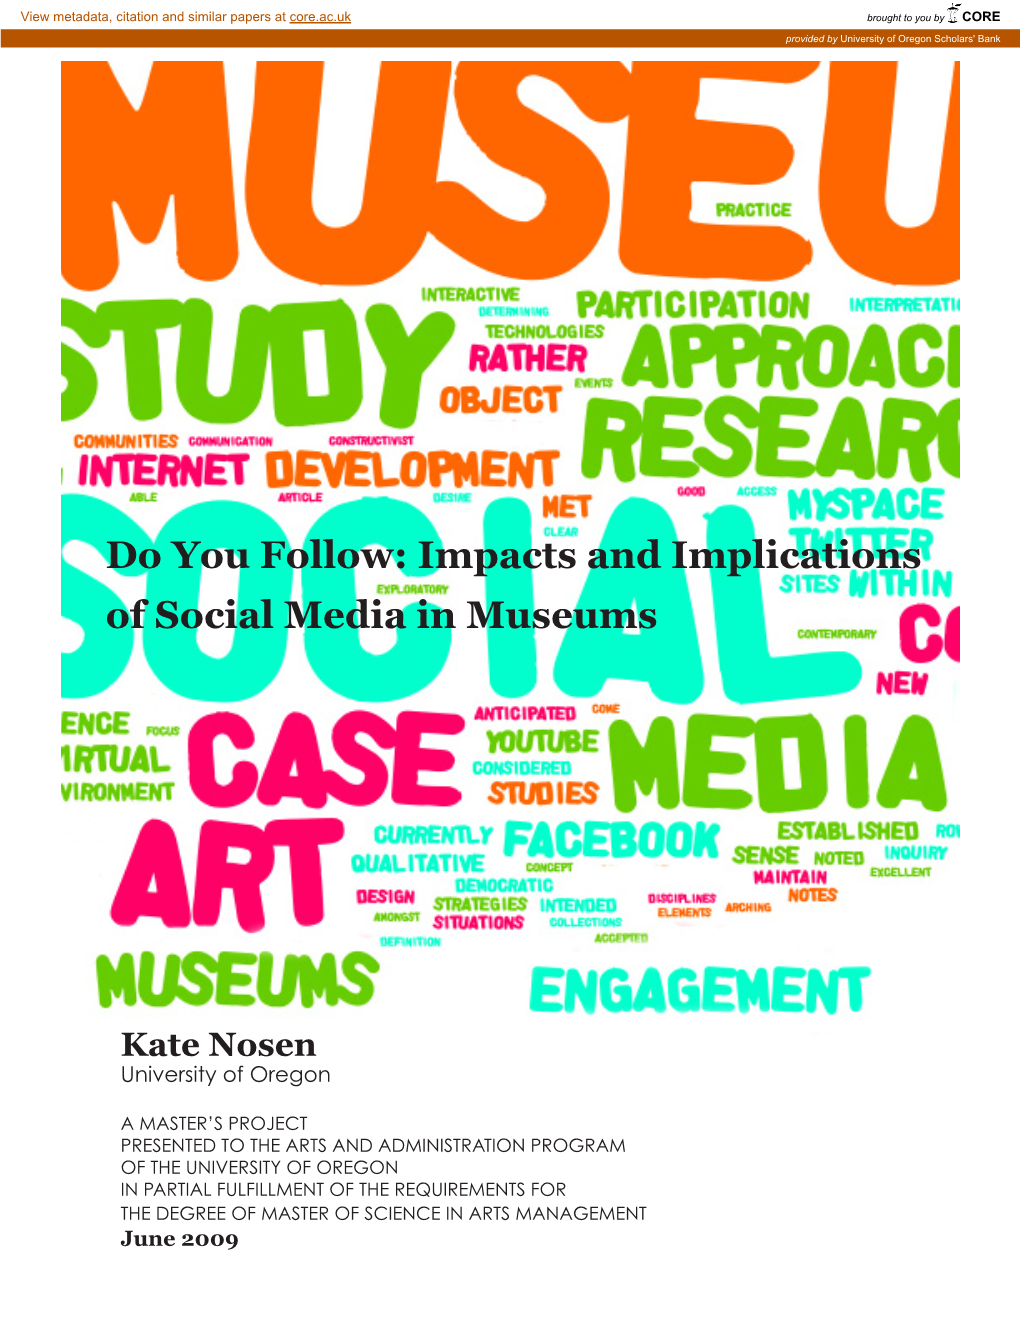 Do You Follow: Impacts and Implications of Social Media in Museums